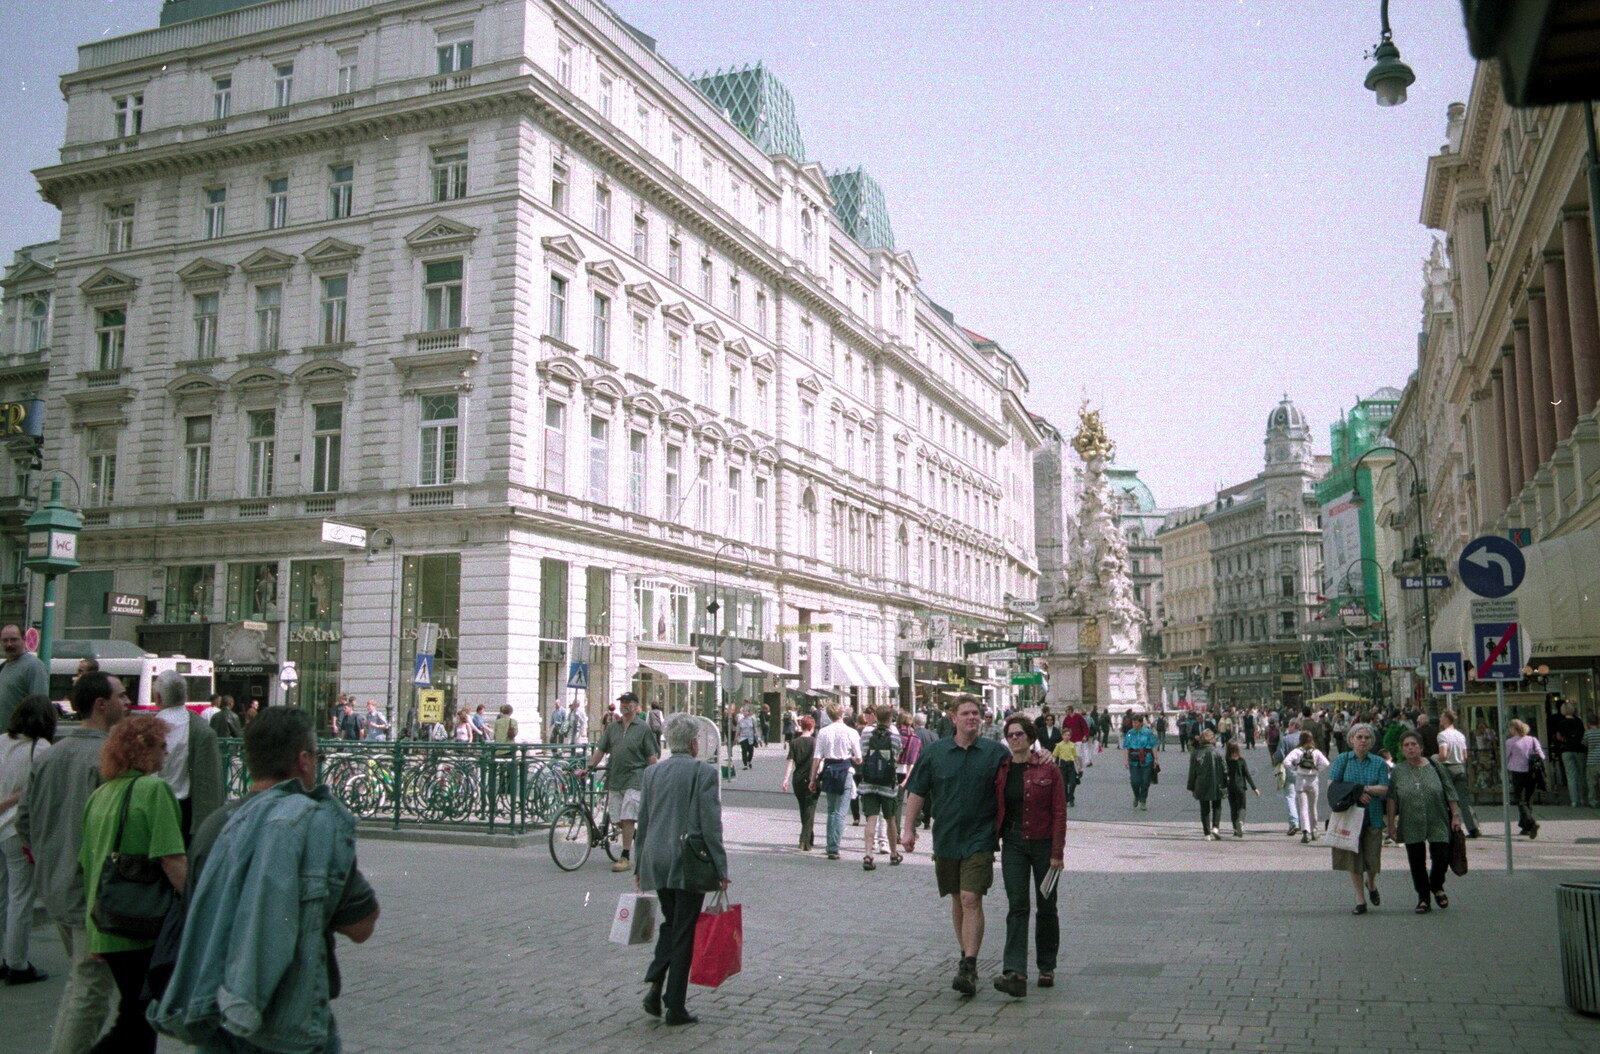 Near St. Stephen's Cathedral from A Postcard From Hofburg Palace, Vienna, Austria - 18th April 2000